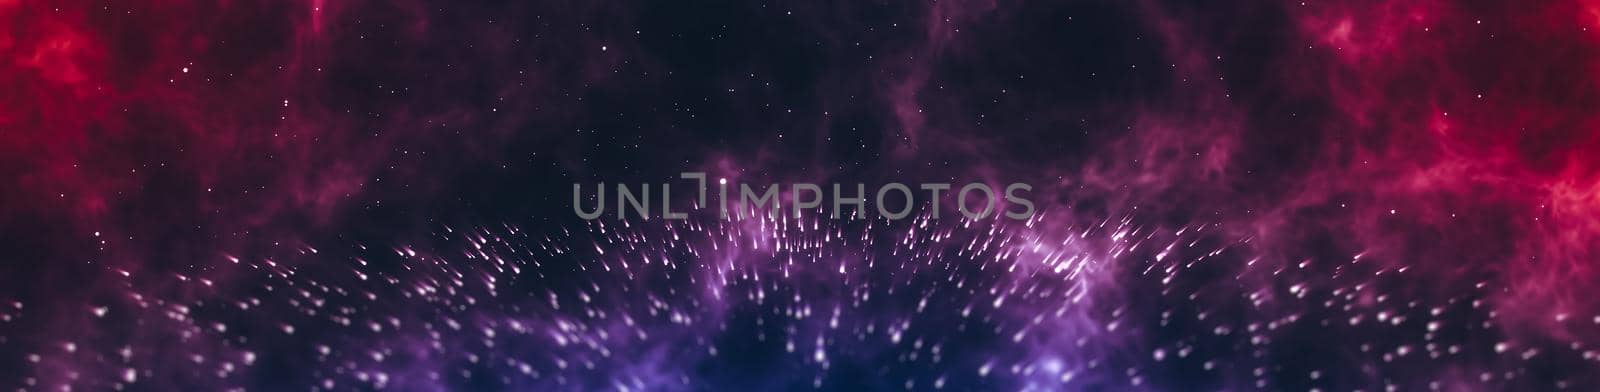 star cluster horizontal background dramatic space scene